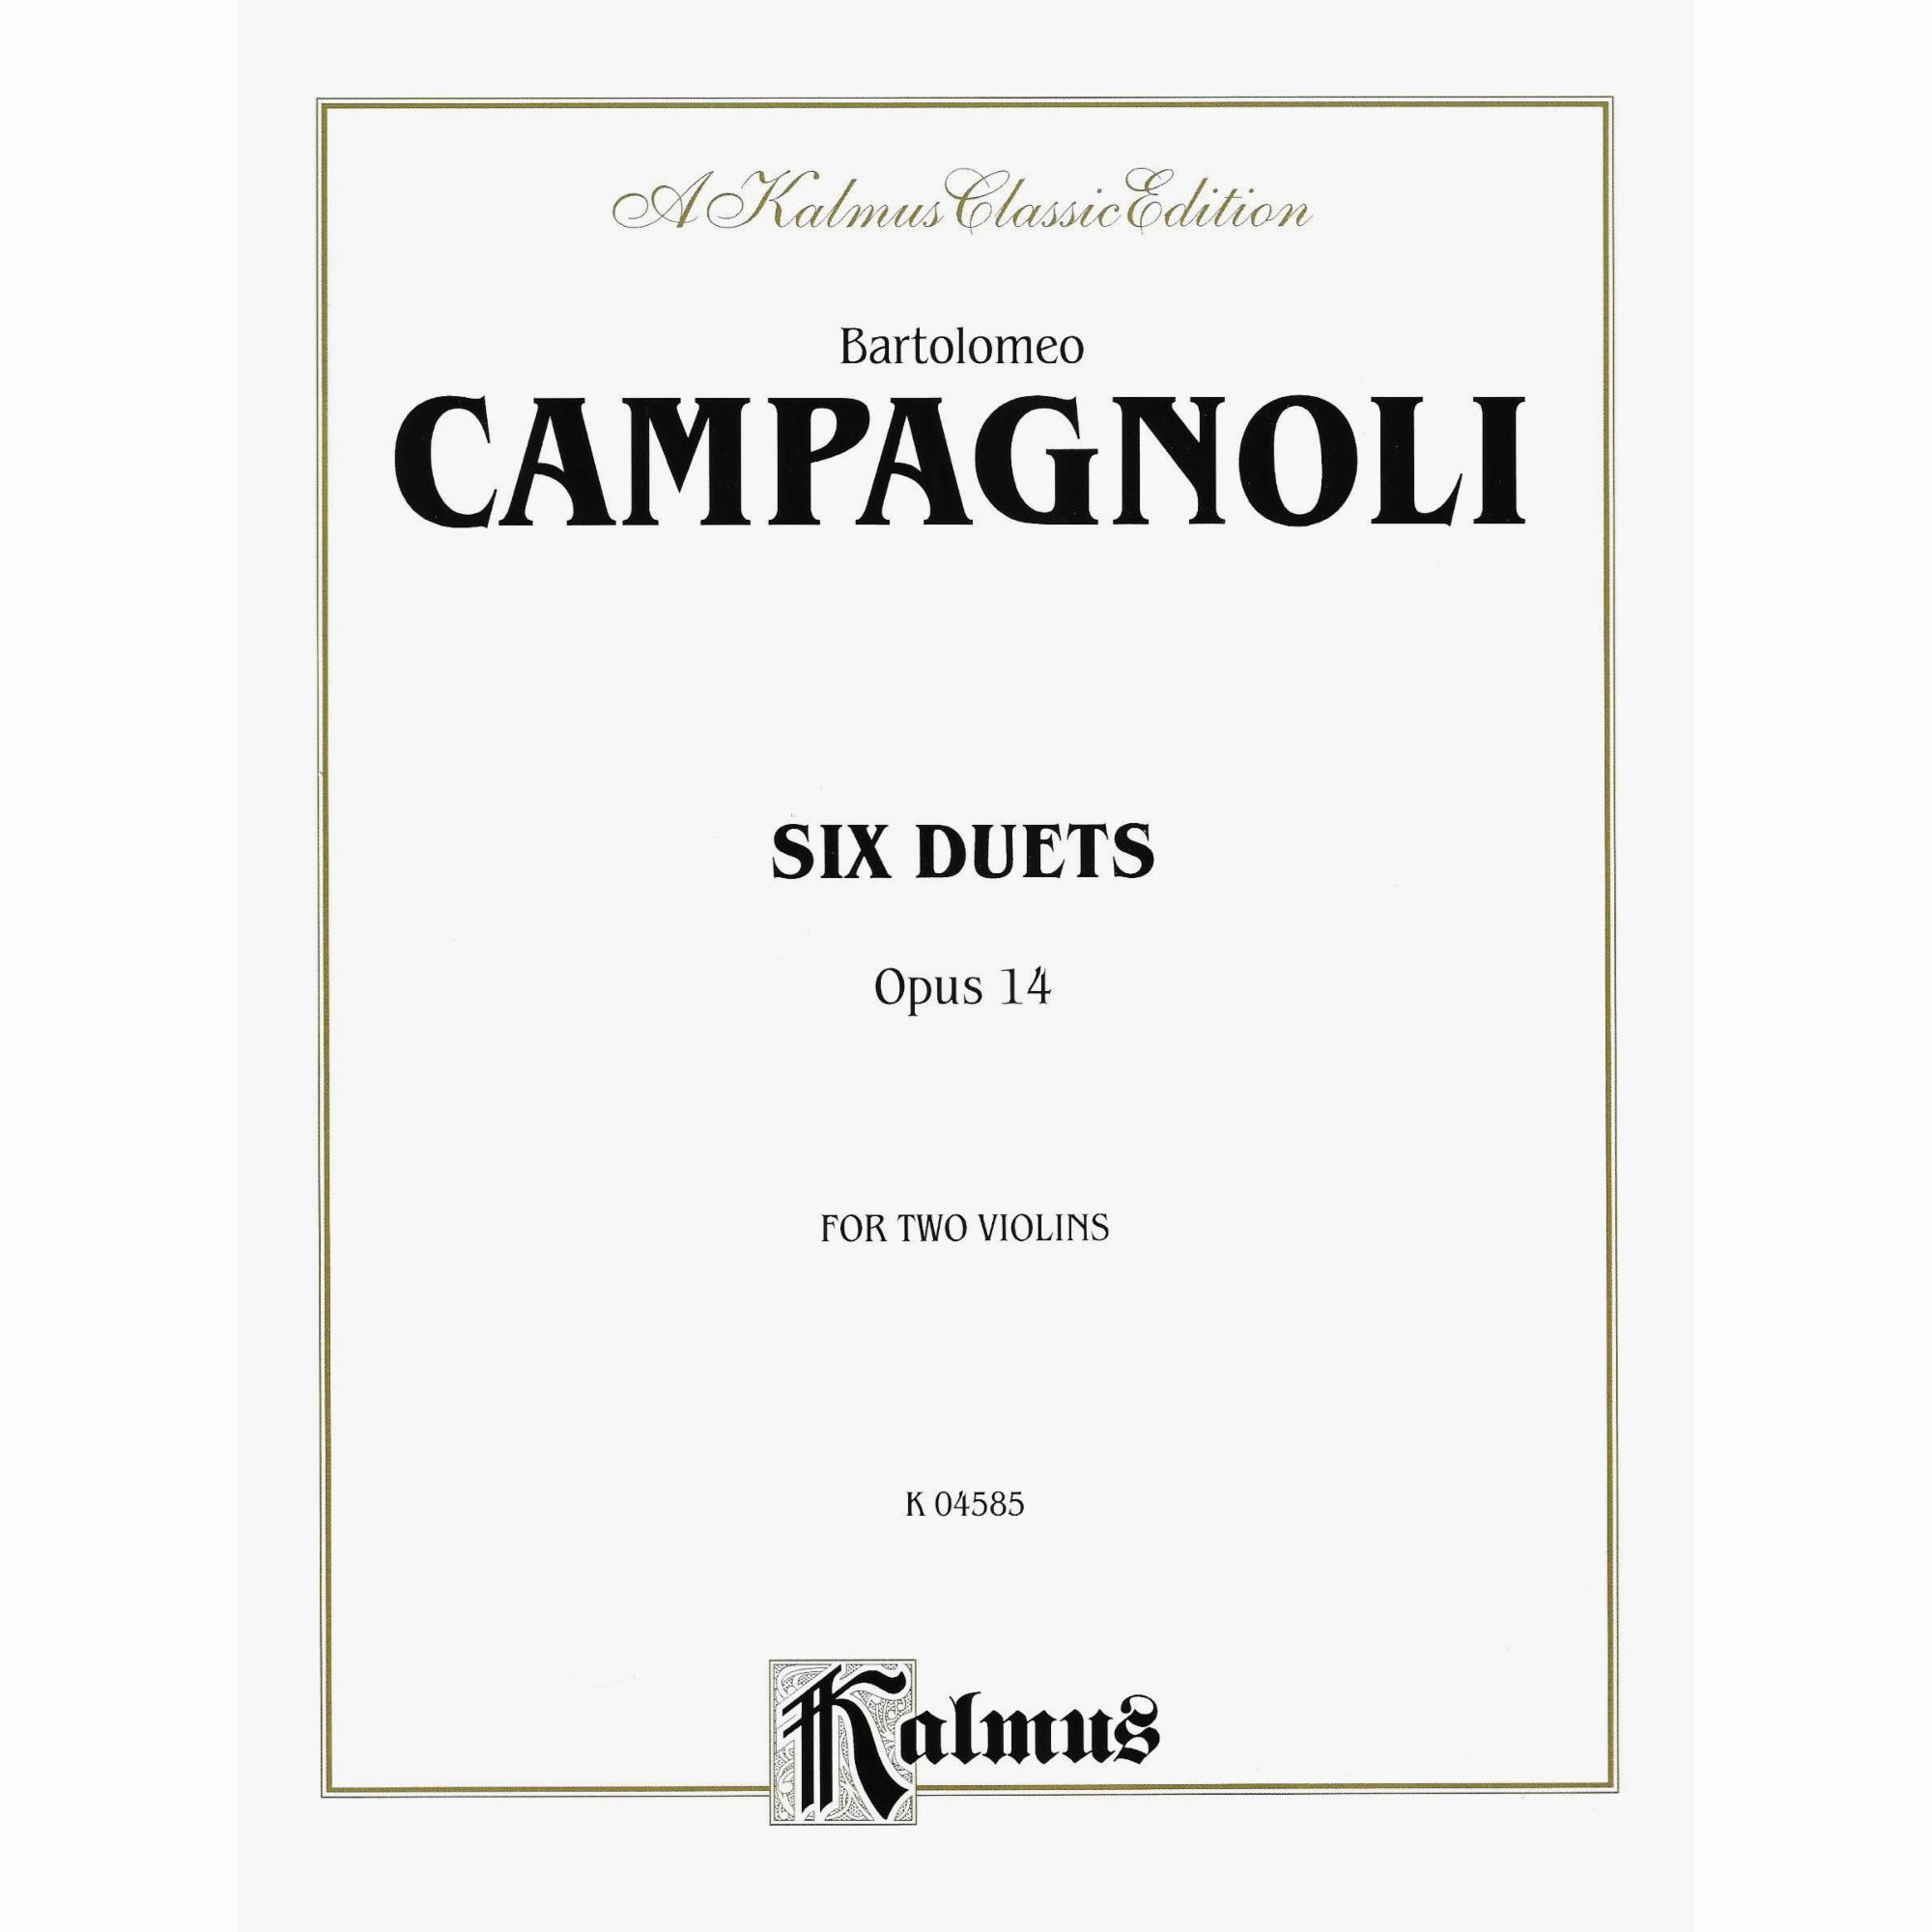 Campagnoli -- Six Duets, Op. 14 for Two Violins